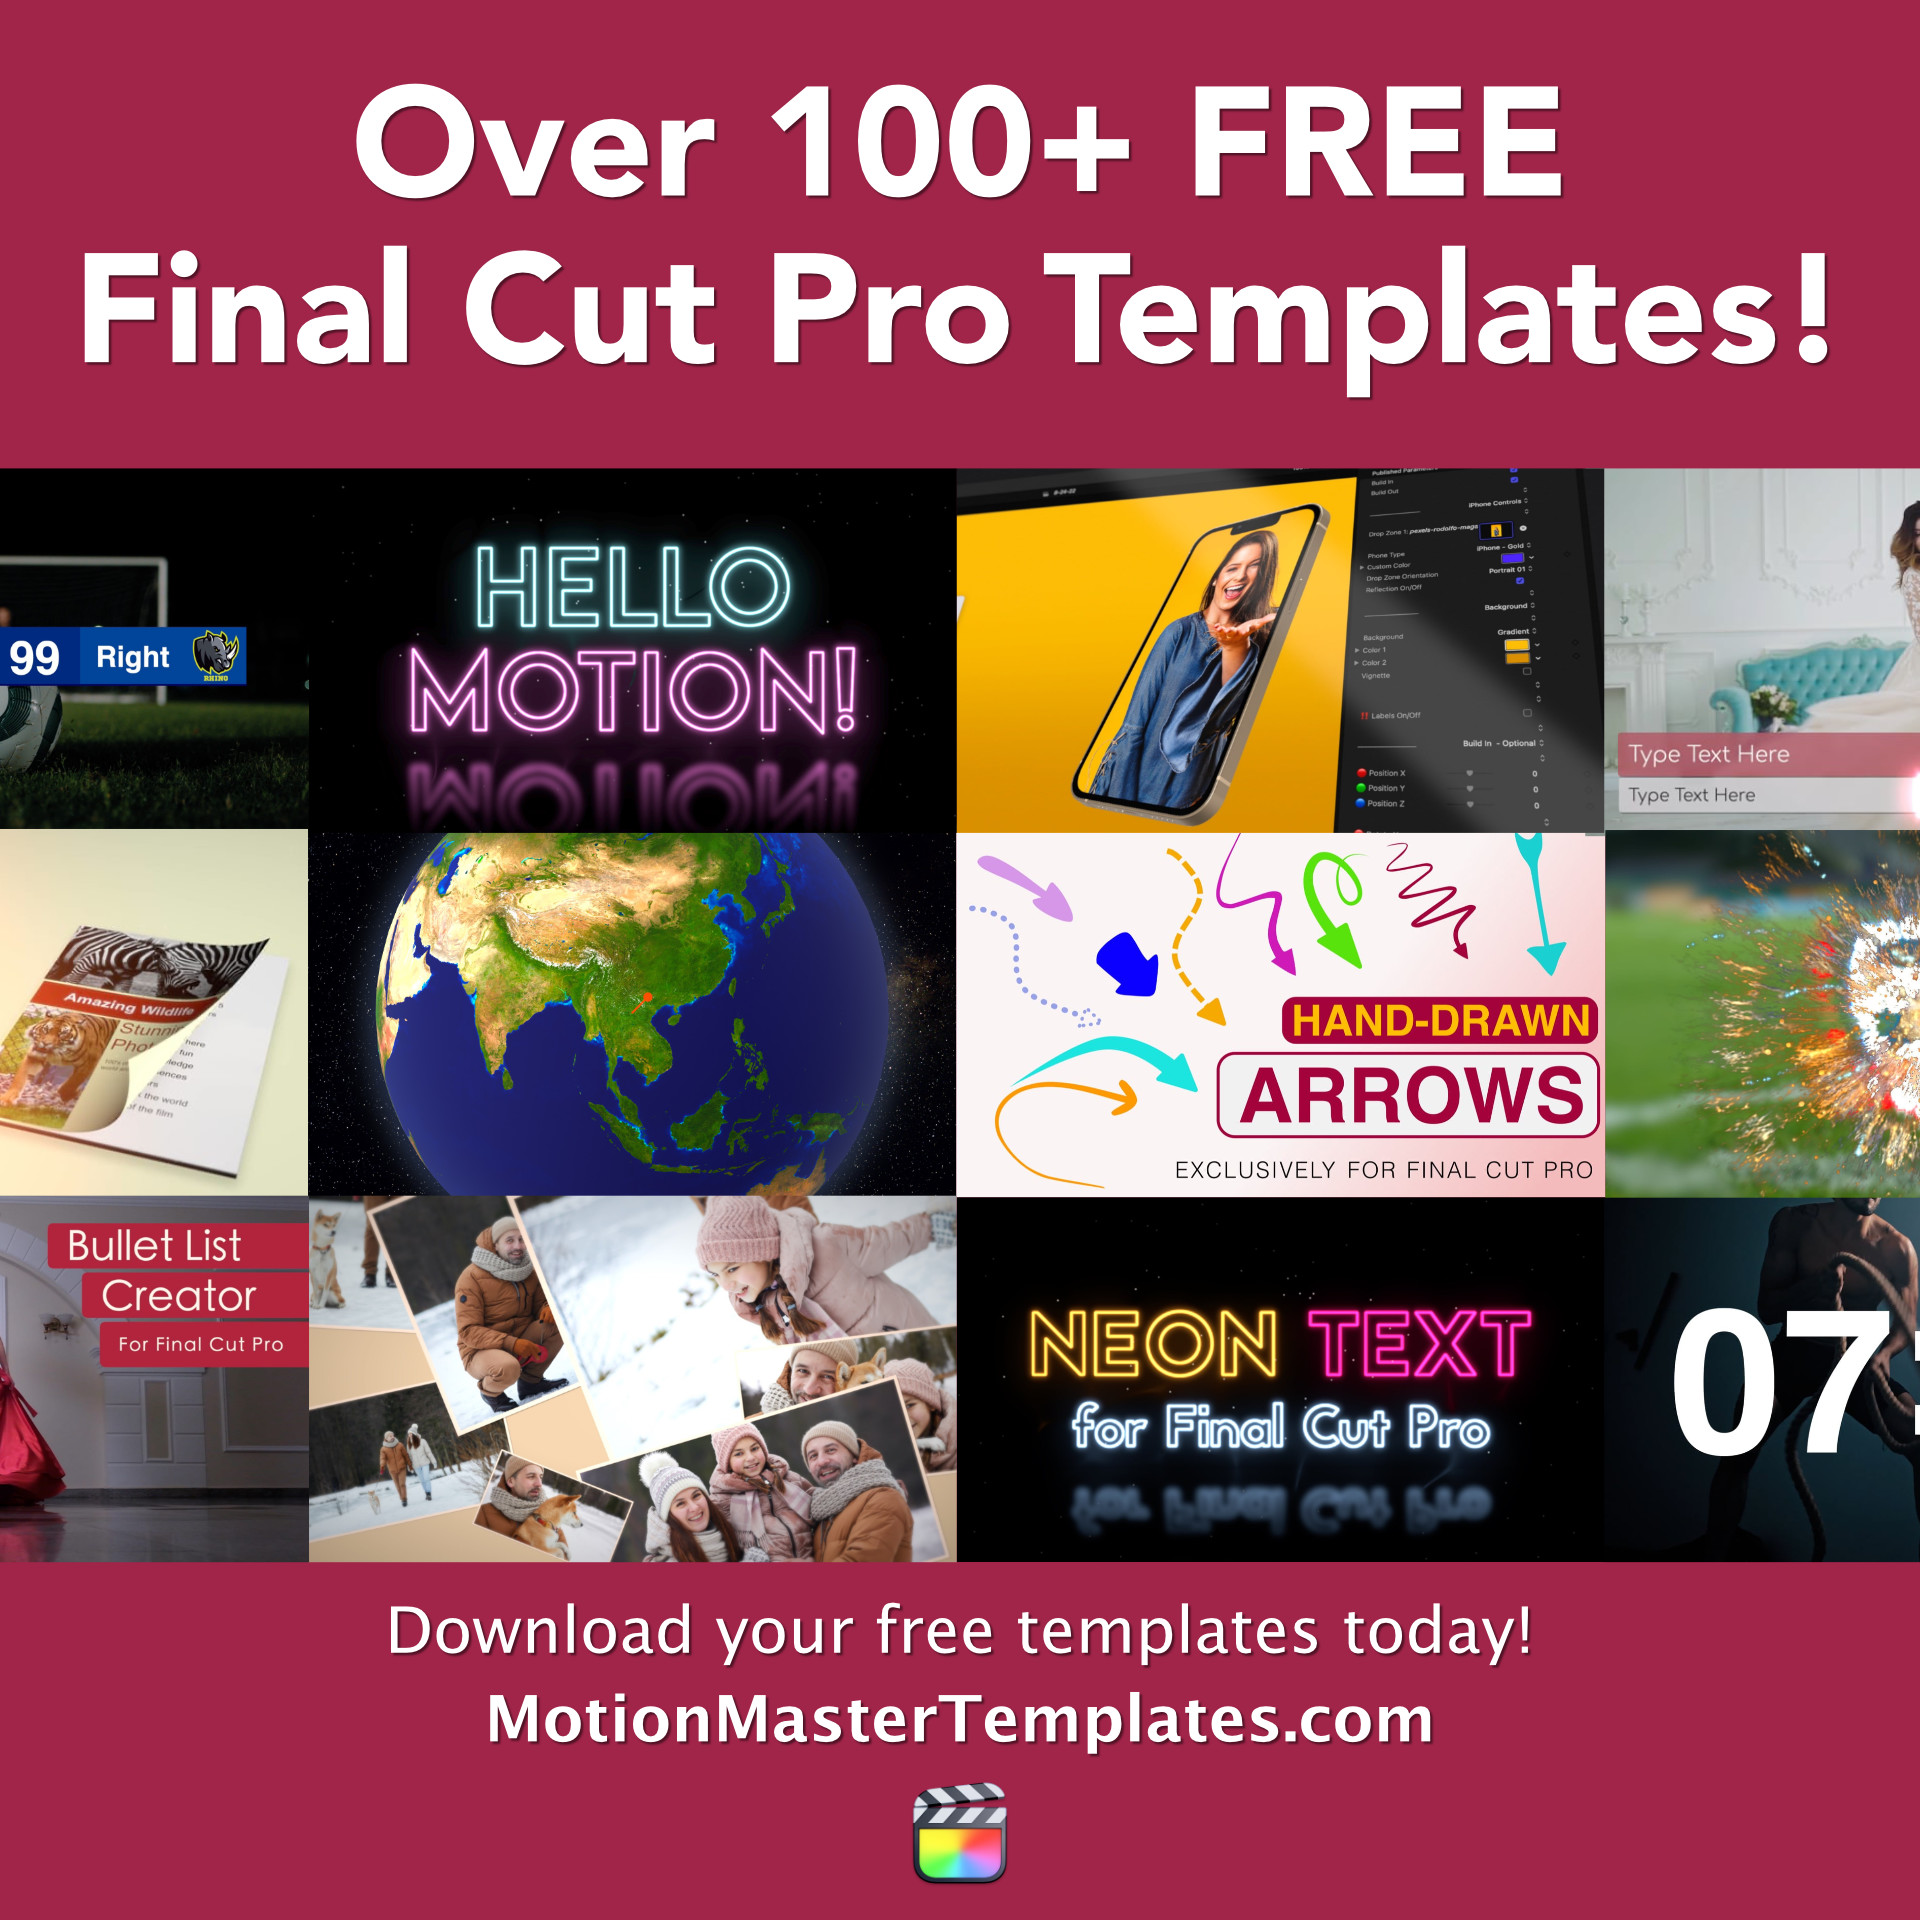 Over 100 Free Final Cut Pro Templates